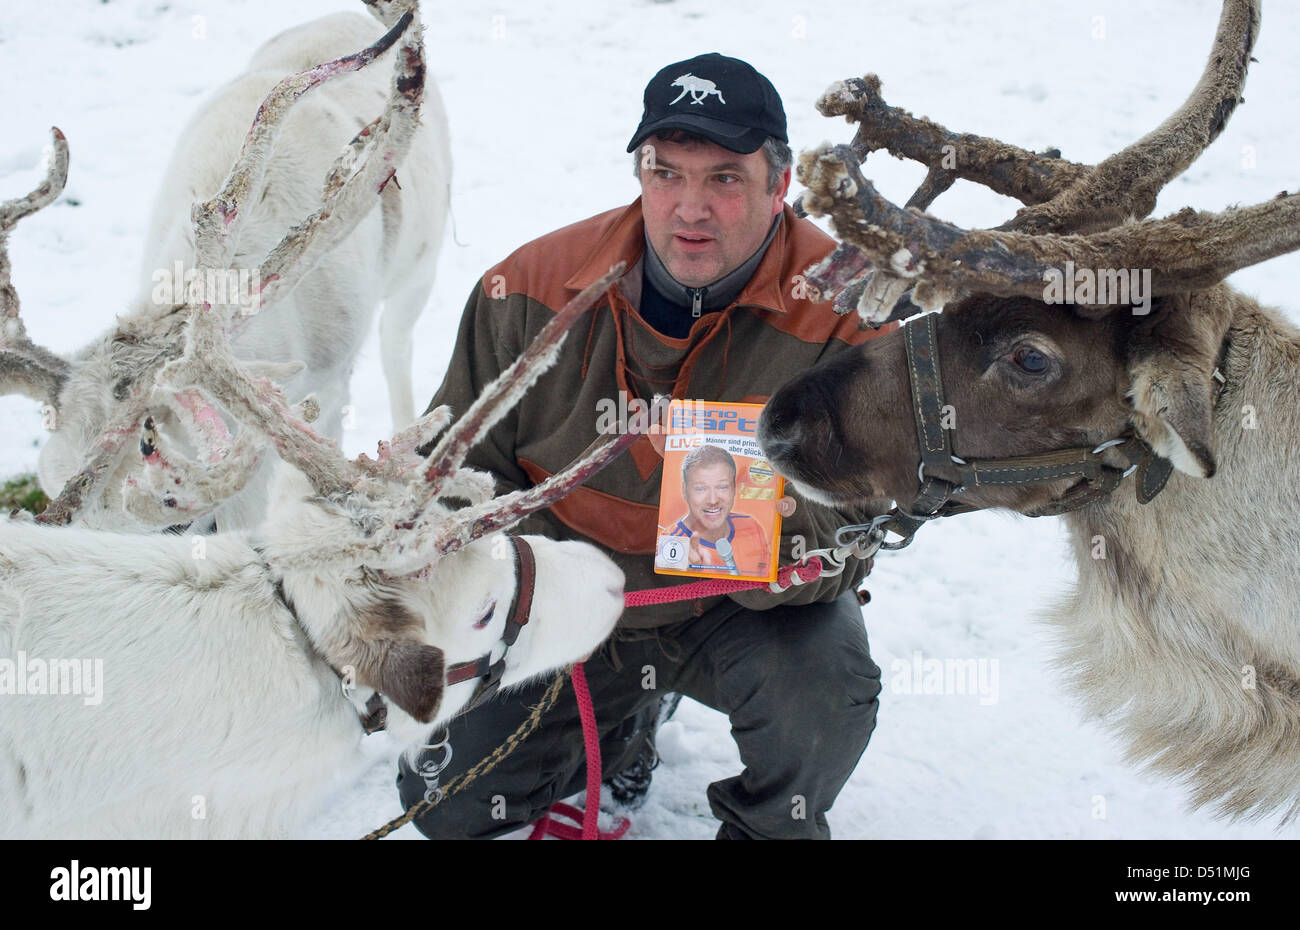 Reindeer breeder Thomas Golz holds a DVD of German comedian Mario Barth in his hands as he poses with his reindeers in Kleptow, Germany, 7 December 2010. Golz treats his animals with live stand-ups be Mario Barth in order to make them unreceptive to distractive exterior stimuli. Photo: Patrick Pleul Stock Photo